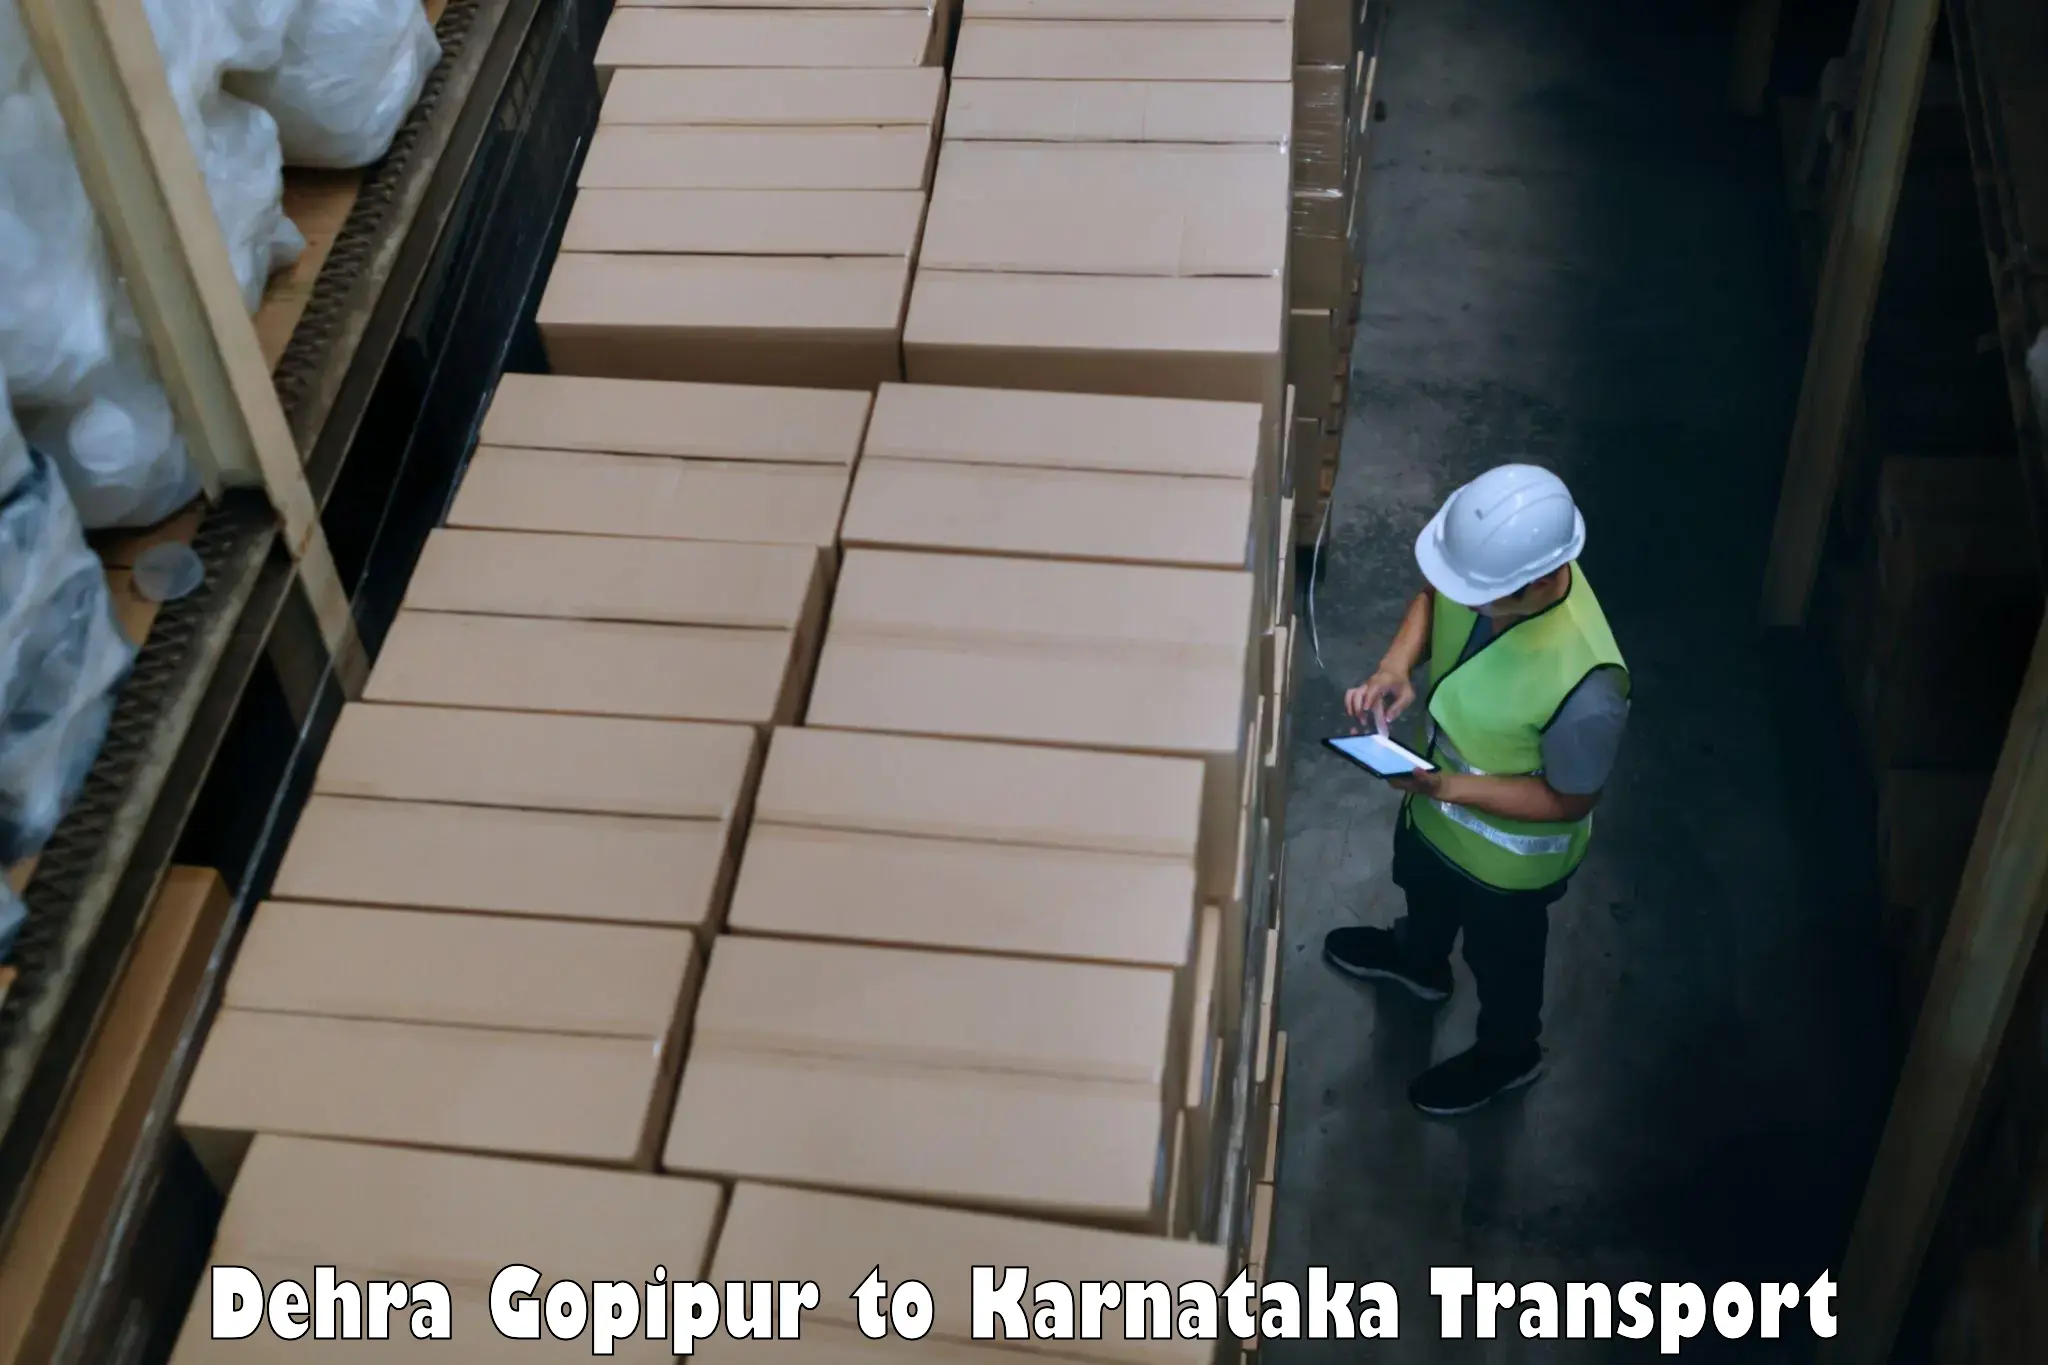 Container transport service Dehra Gopipur to Dharmasthala